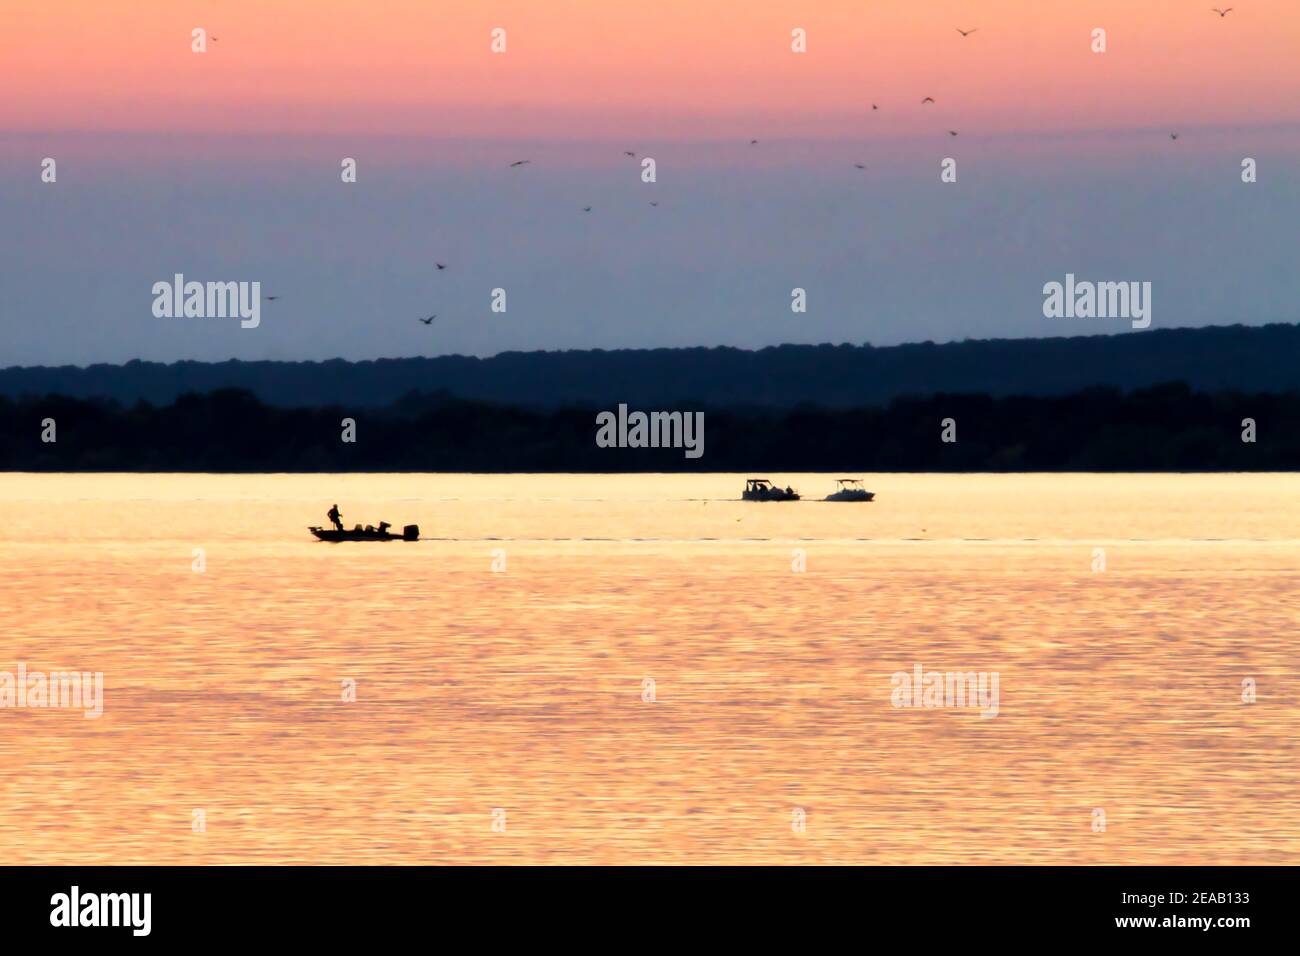 Grand Lake O' the Cherokees at Grove Oklahoma is well loved by fishermen as depicted in this photo of three boats on the water at sunset. Stock Photo